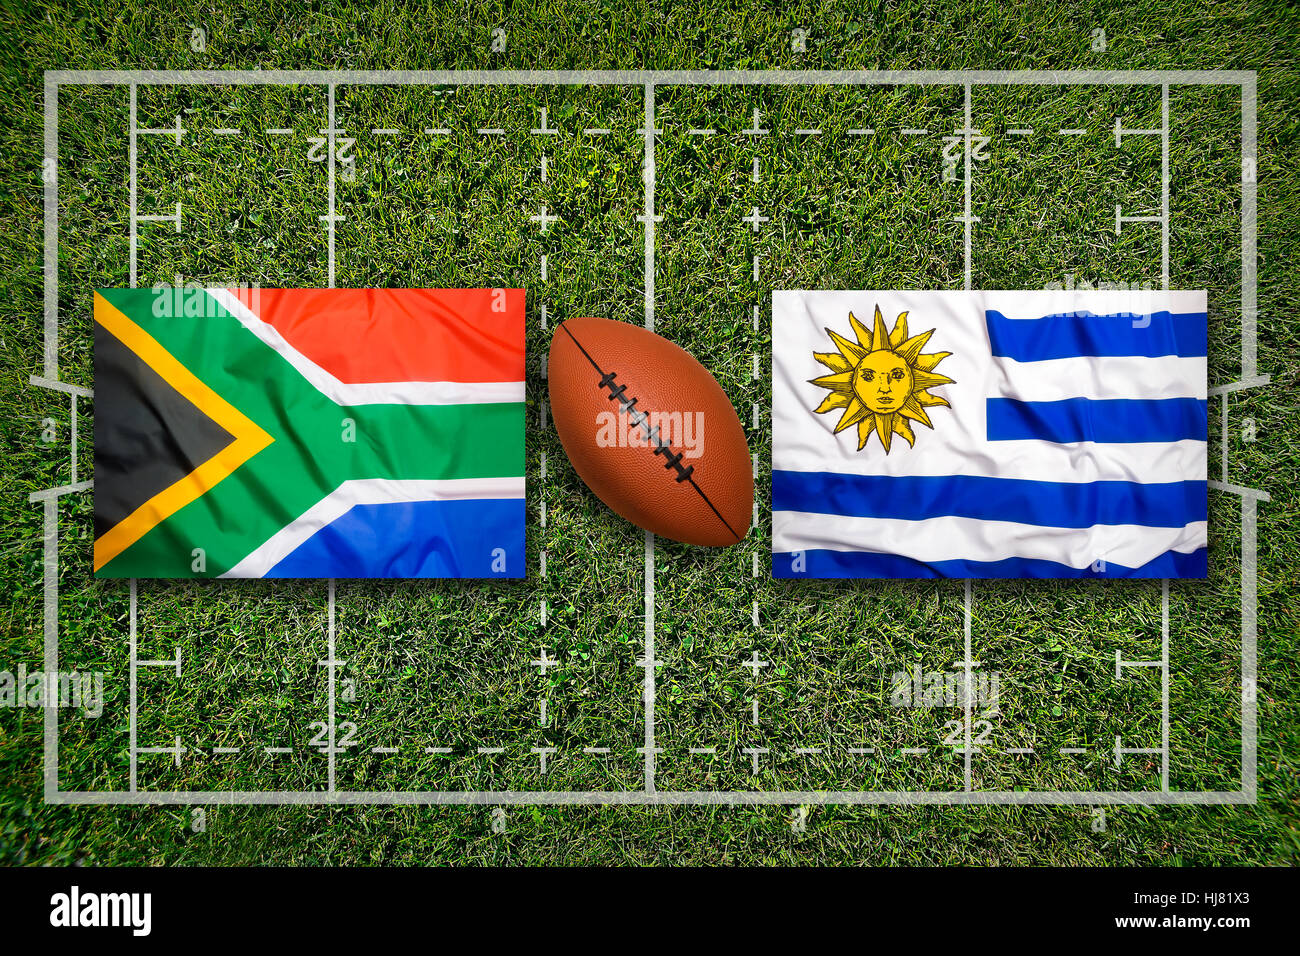 South Africa vs. Uruguay flags on green rugby field Stock Photo